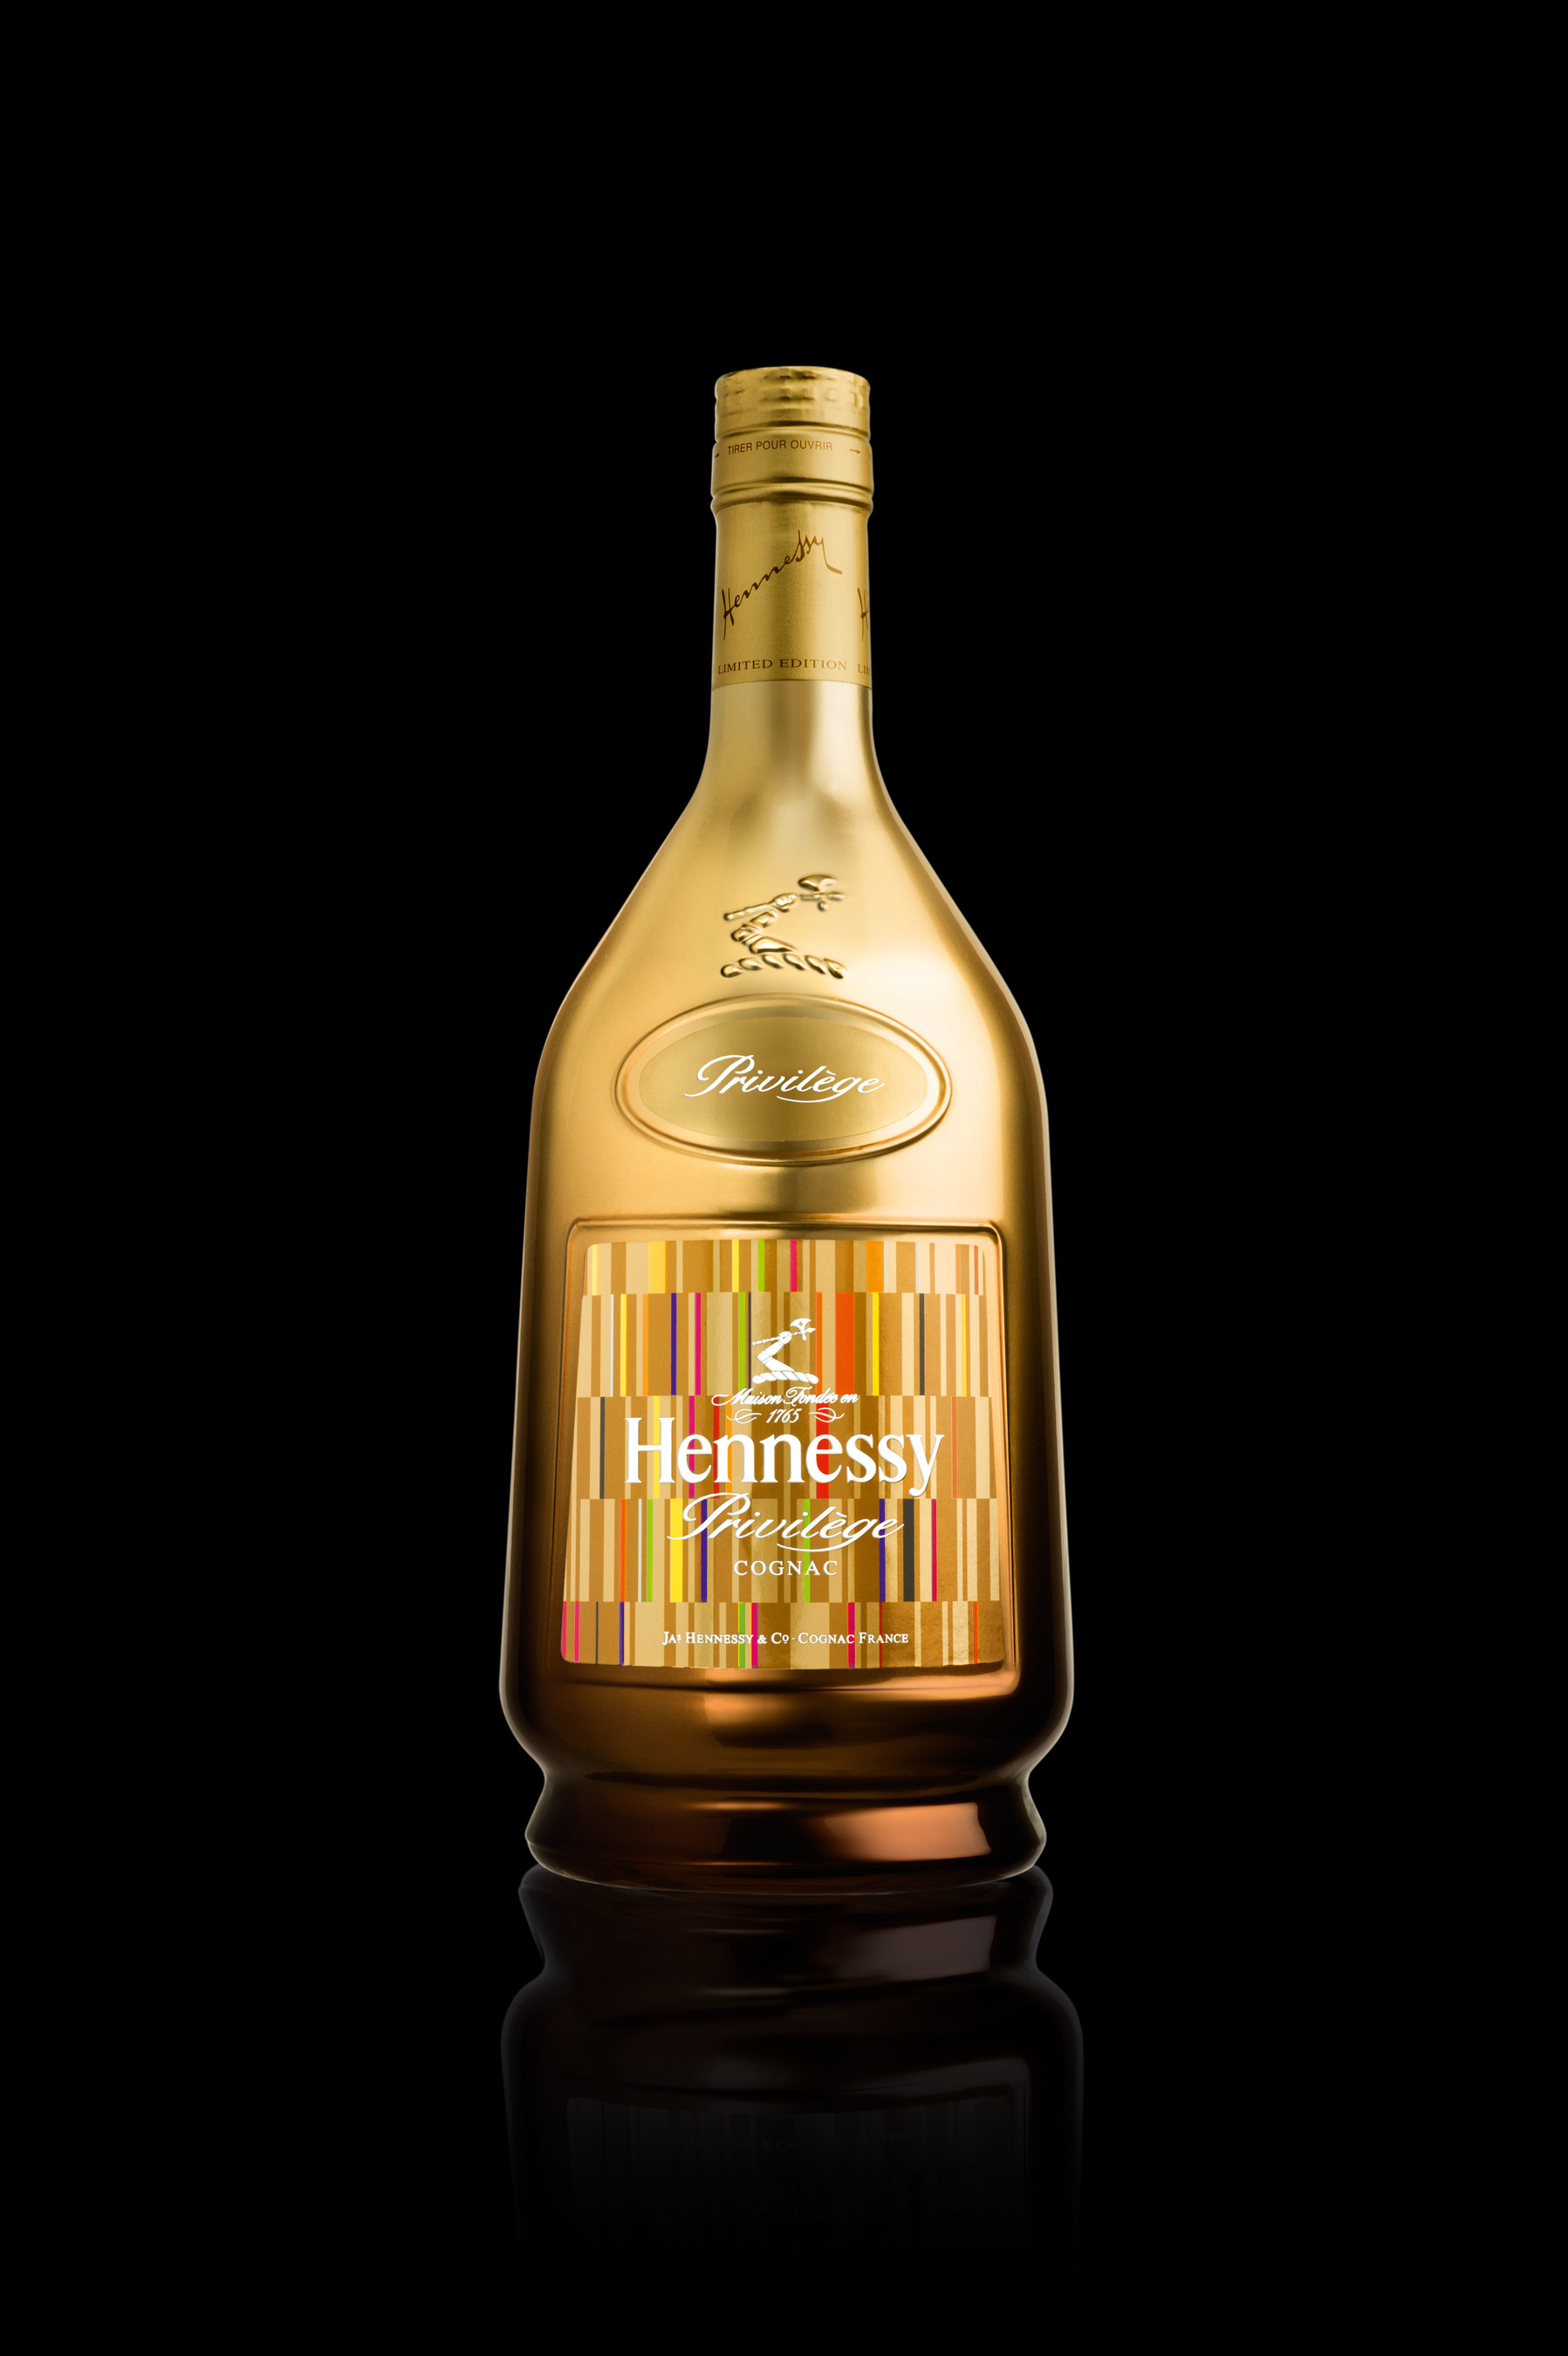 HENNESSY V.S.O.P COGNAC COLLABORATES WITH THE AWARD-WINNING